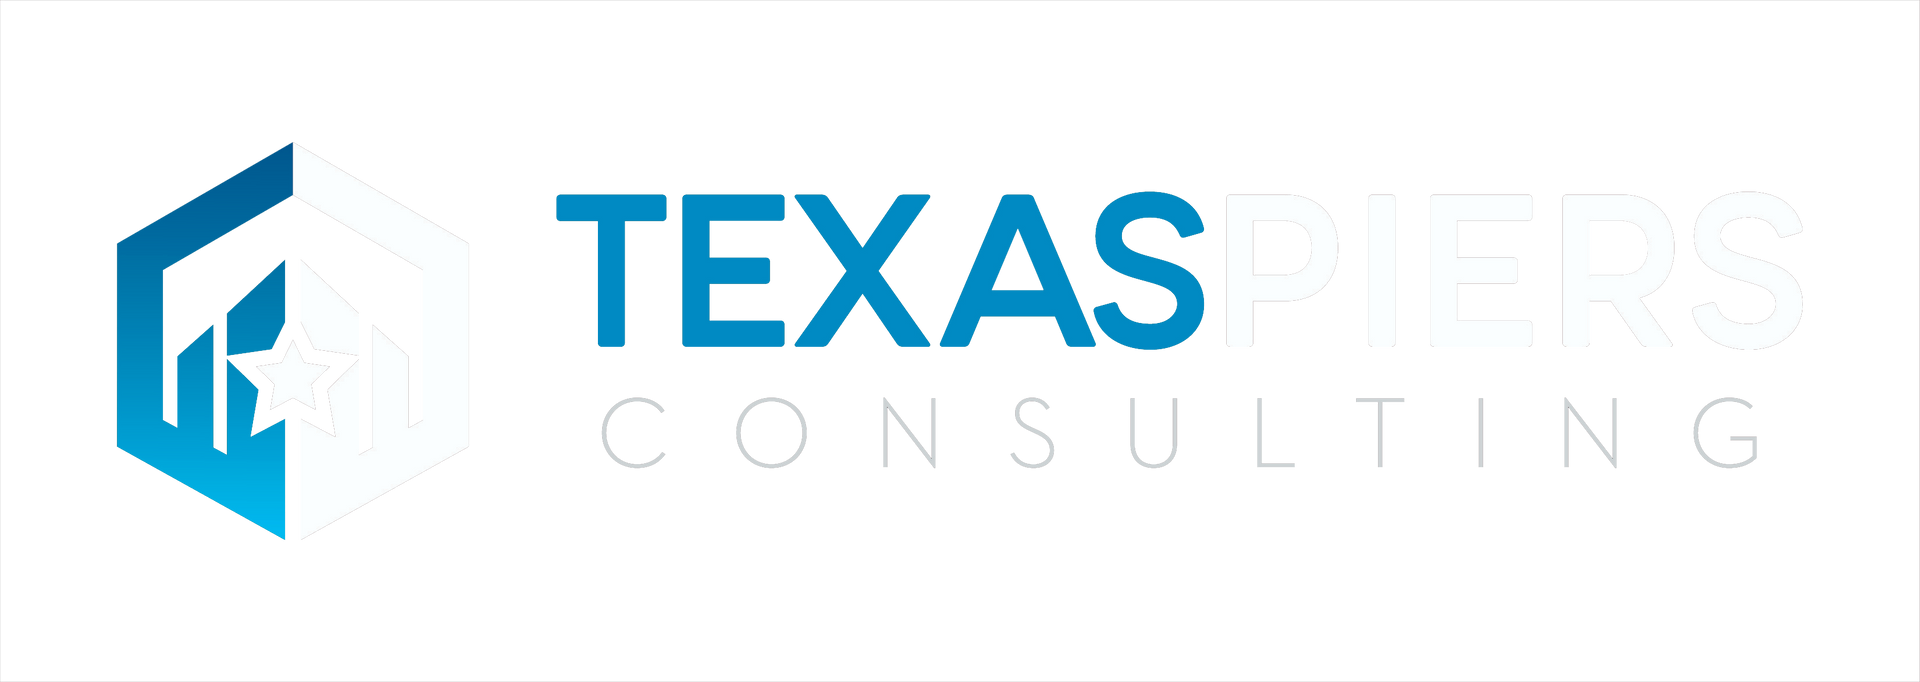 Texas Piers Consulting_Logotype